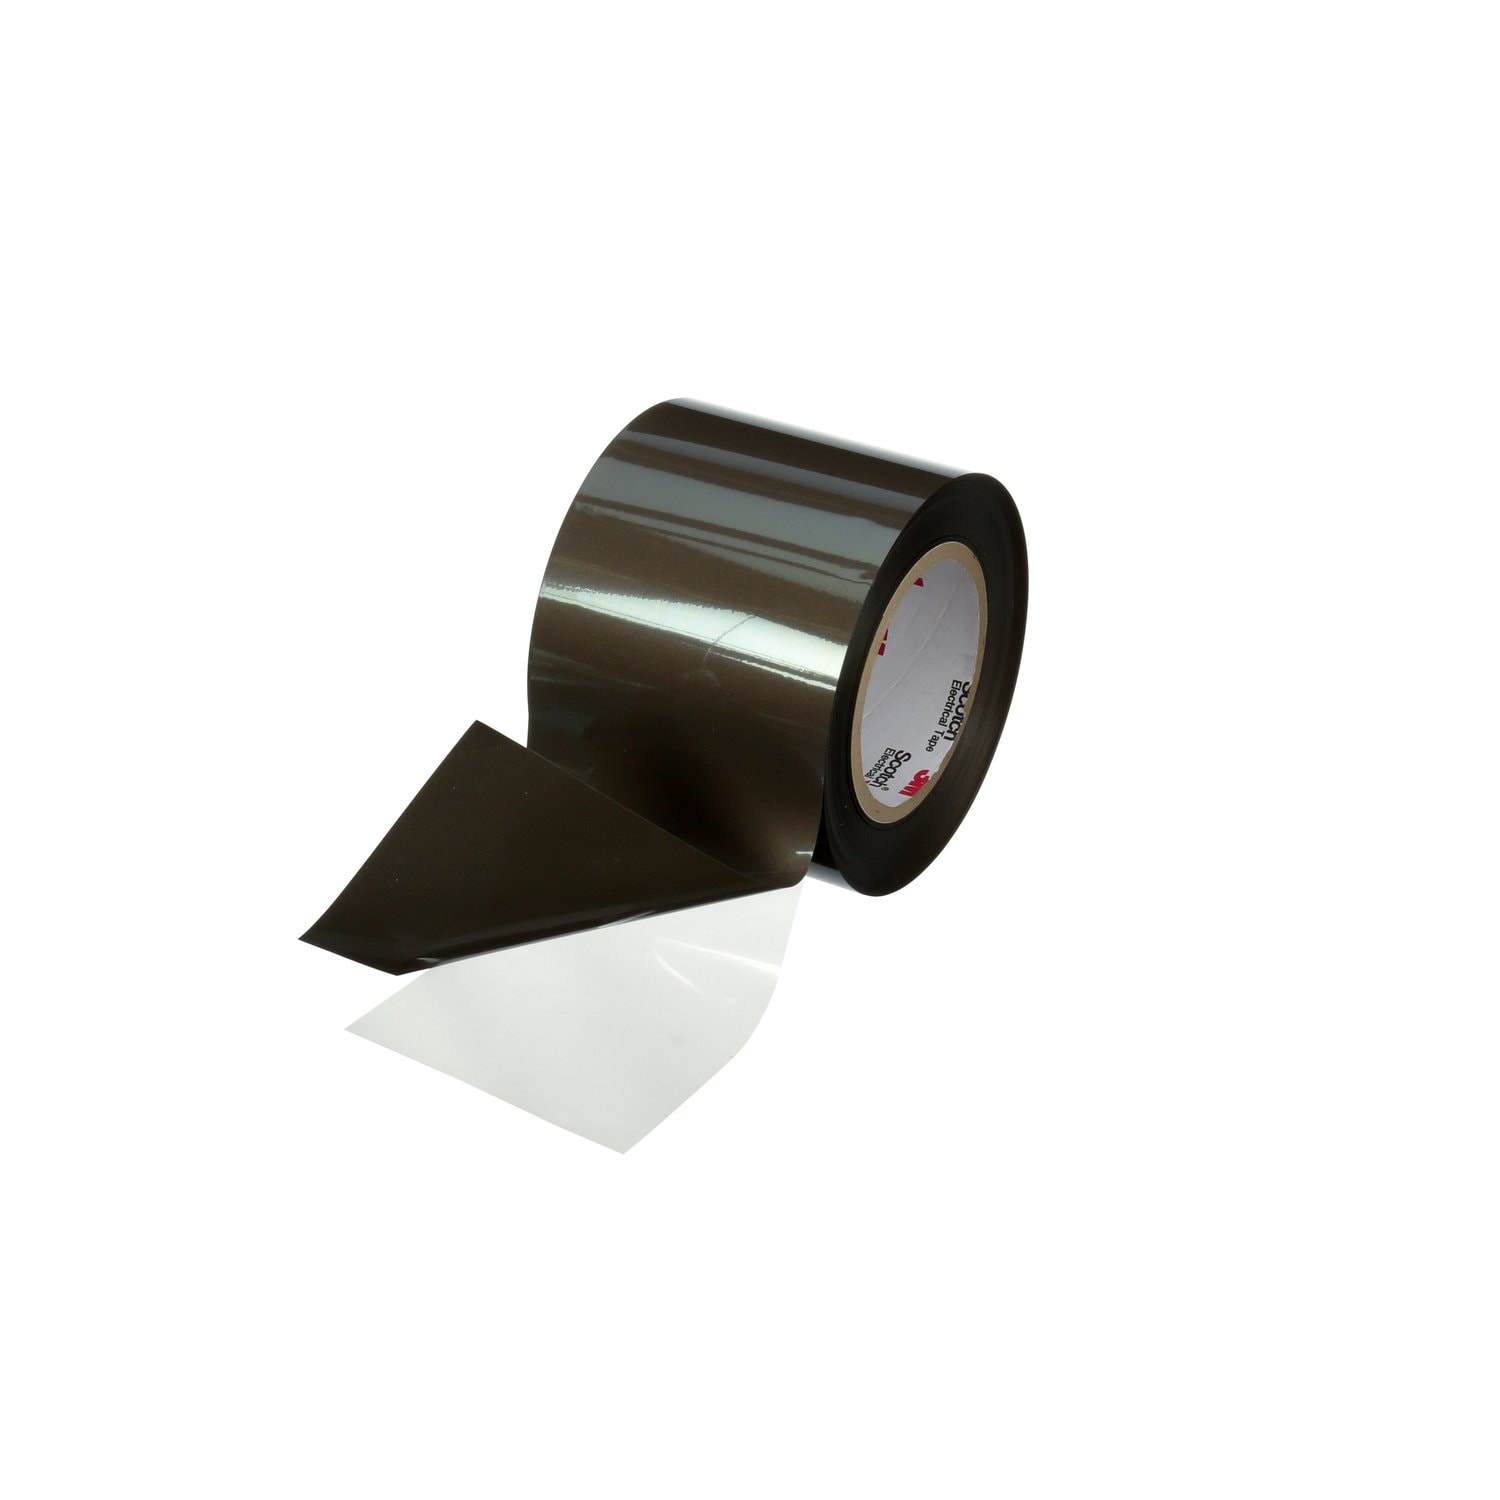 7100261680 - 3M Electrically Conductive Double-Sided Tape 9711S, 250um, 1060 mm x
100 m